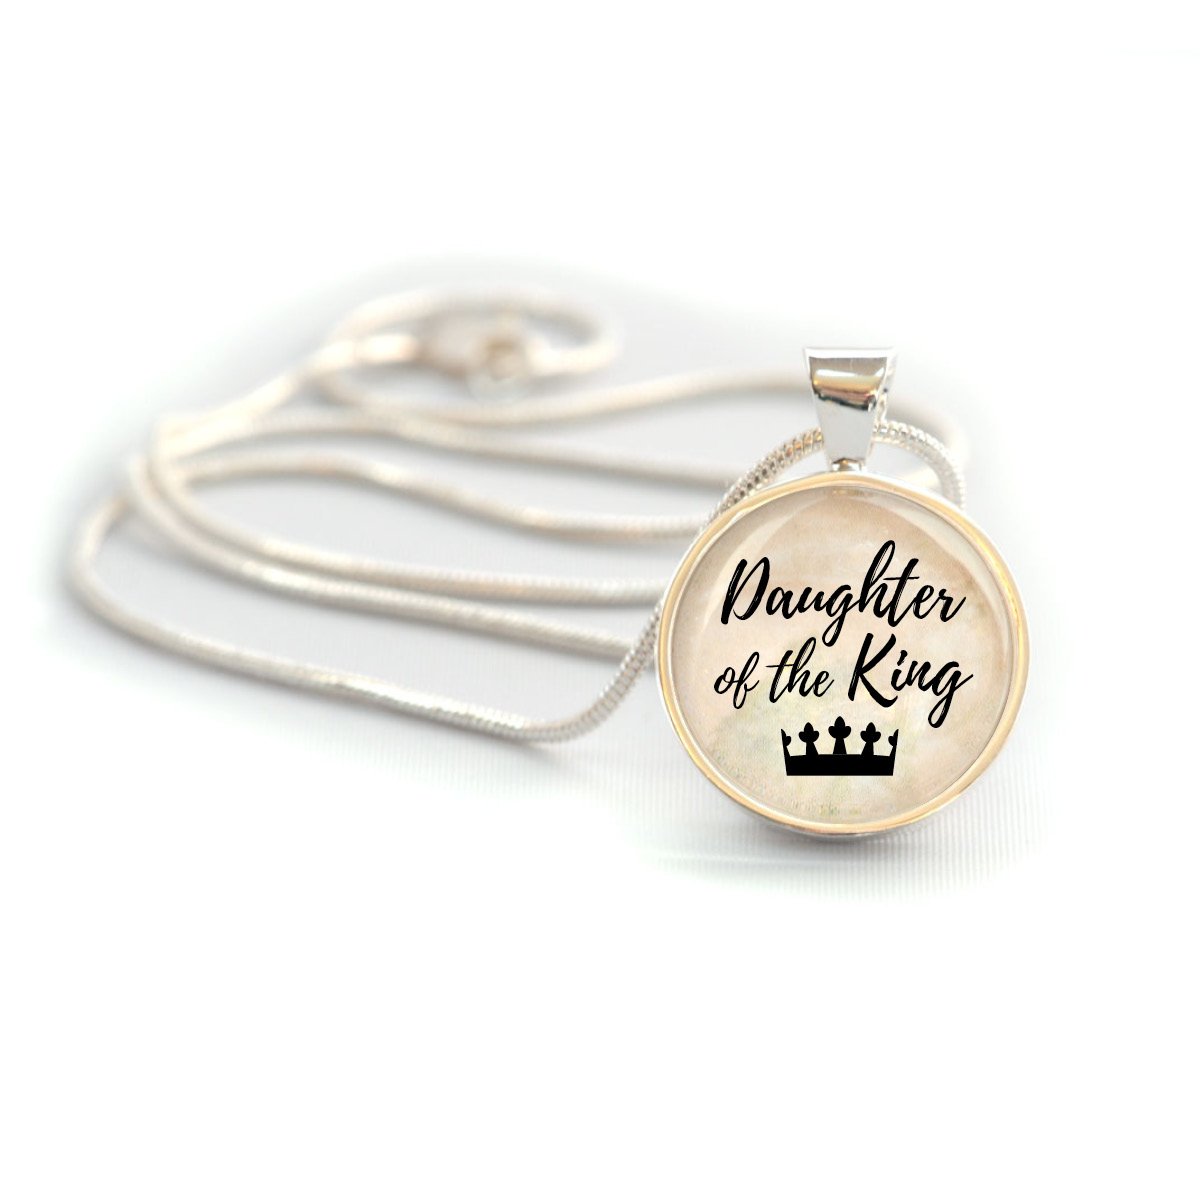 Daughter of the King Silver-Plated Pendant Necklace - Handcrafted Christian Jewelry with Crown Illustration and 20" Chain Bijou Her